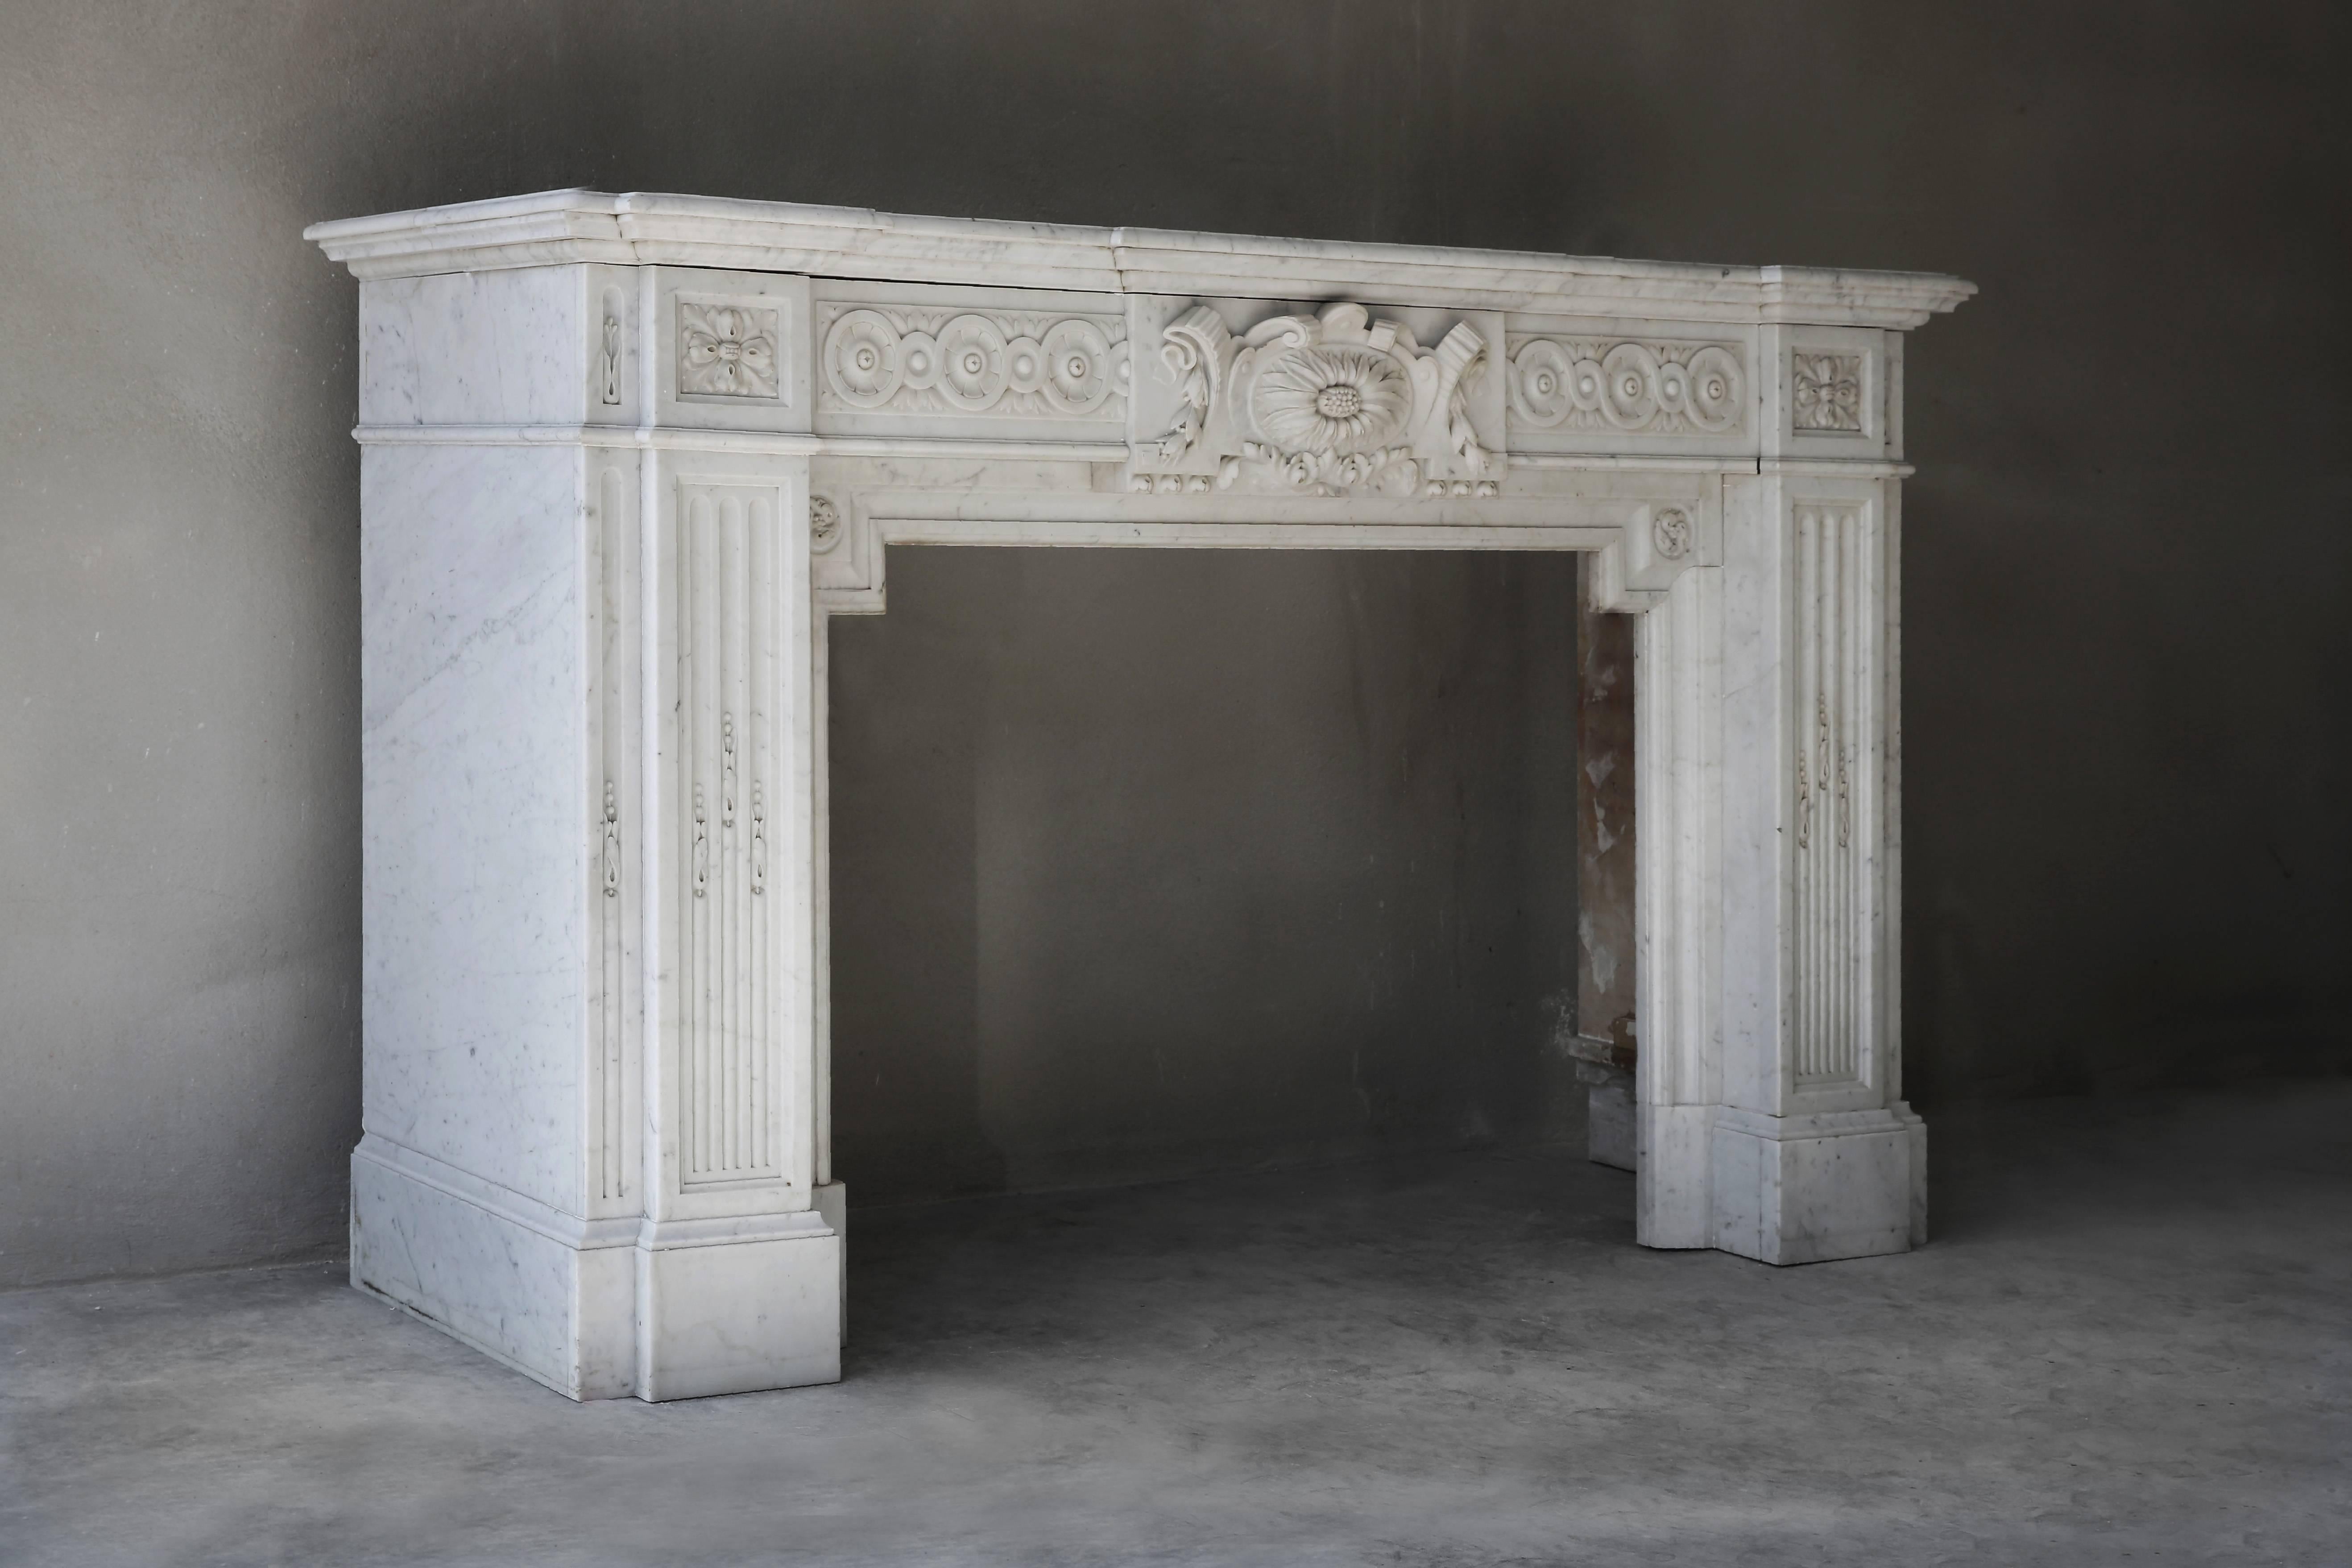 A very unique and exclusive antique mantelpiece made of Carrara marble from the quarries of Carrara, a village in Italy. Carrara is a very exclusive and beautiful type of marble. This neo-classistic chimney is of high quality, dates from the period